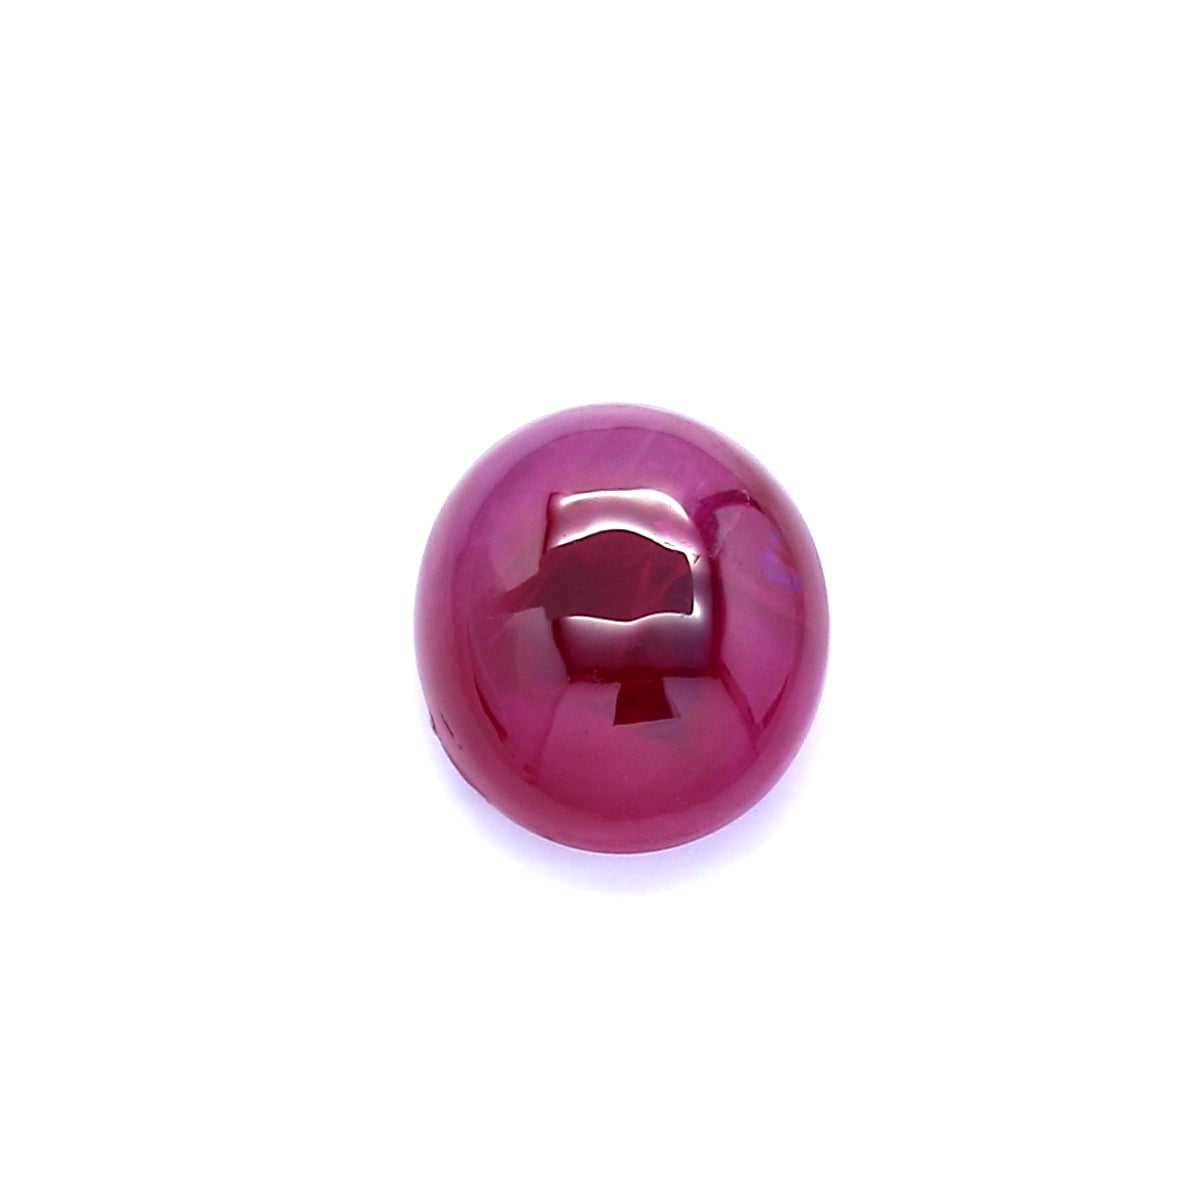 2.43ct Oval Cabochon Ruby, H(a), Myanmar - 8.26 x 7.28 x 3.76mm